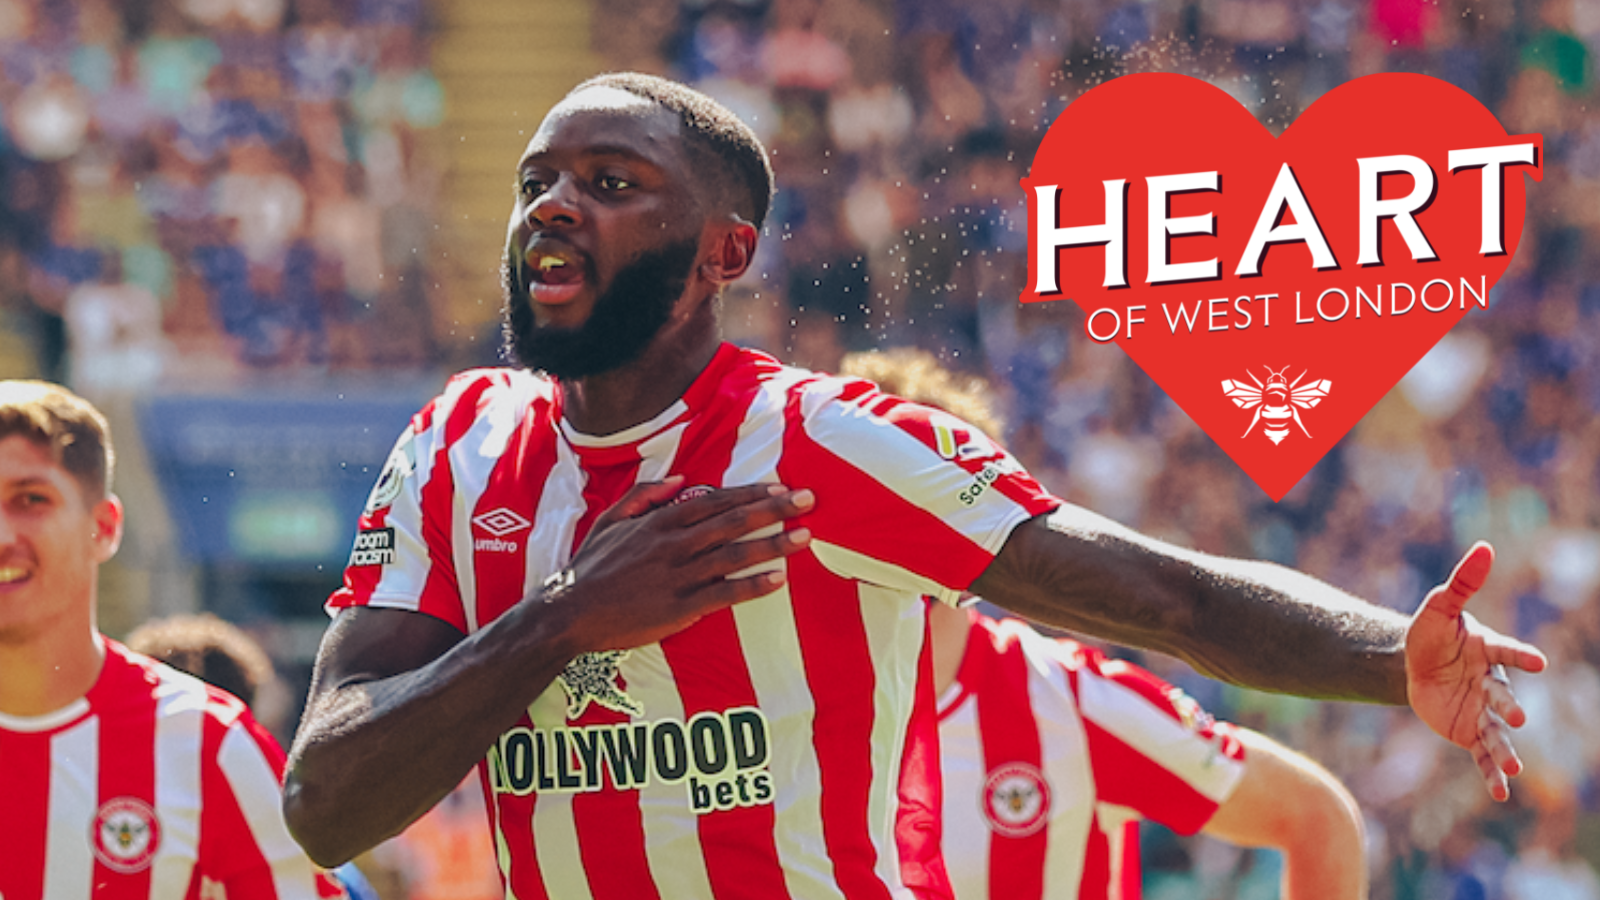 Brentford player holding his heart in a red & white striped shirt with the Heart of West London logo on the top right